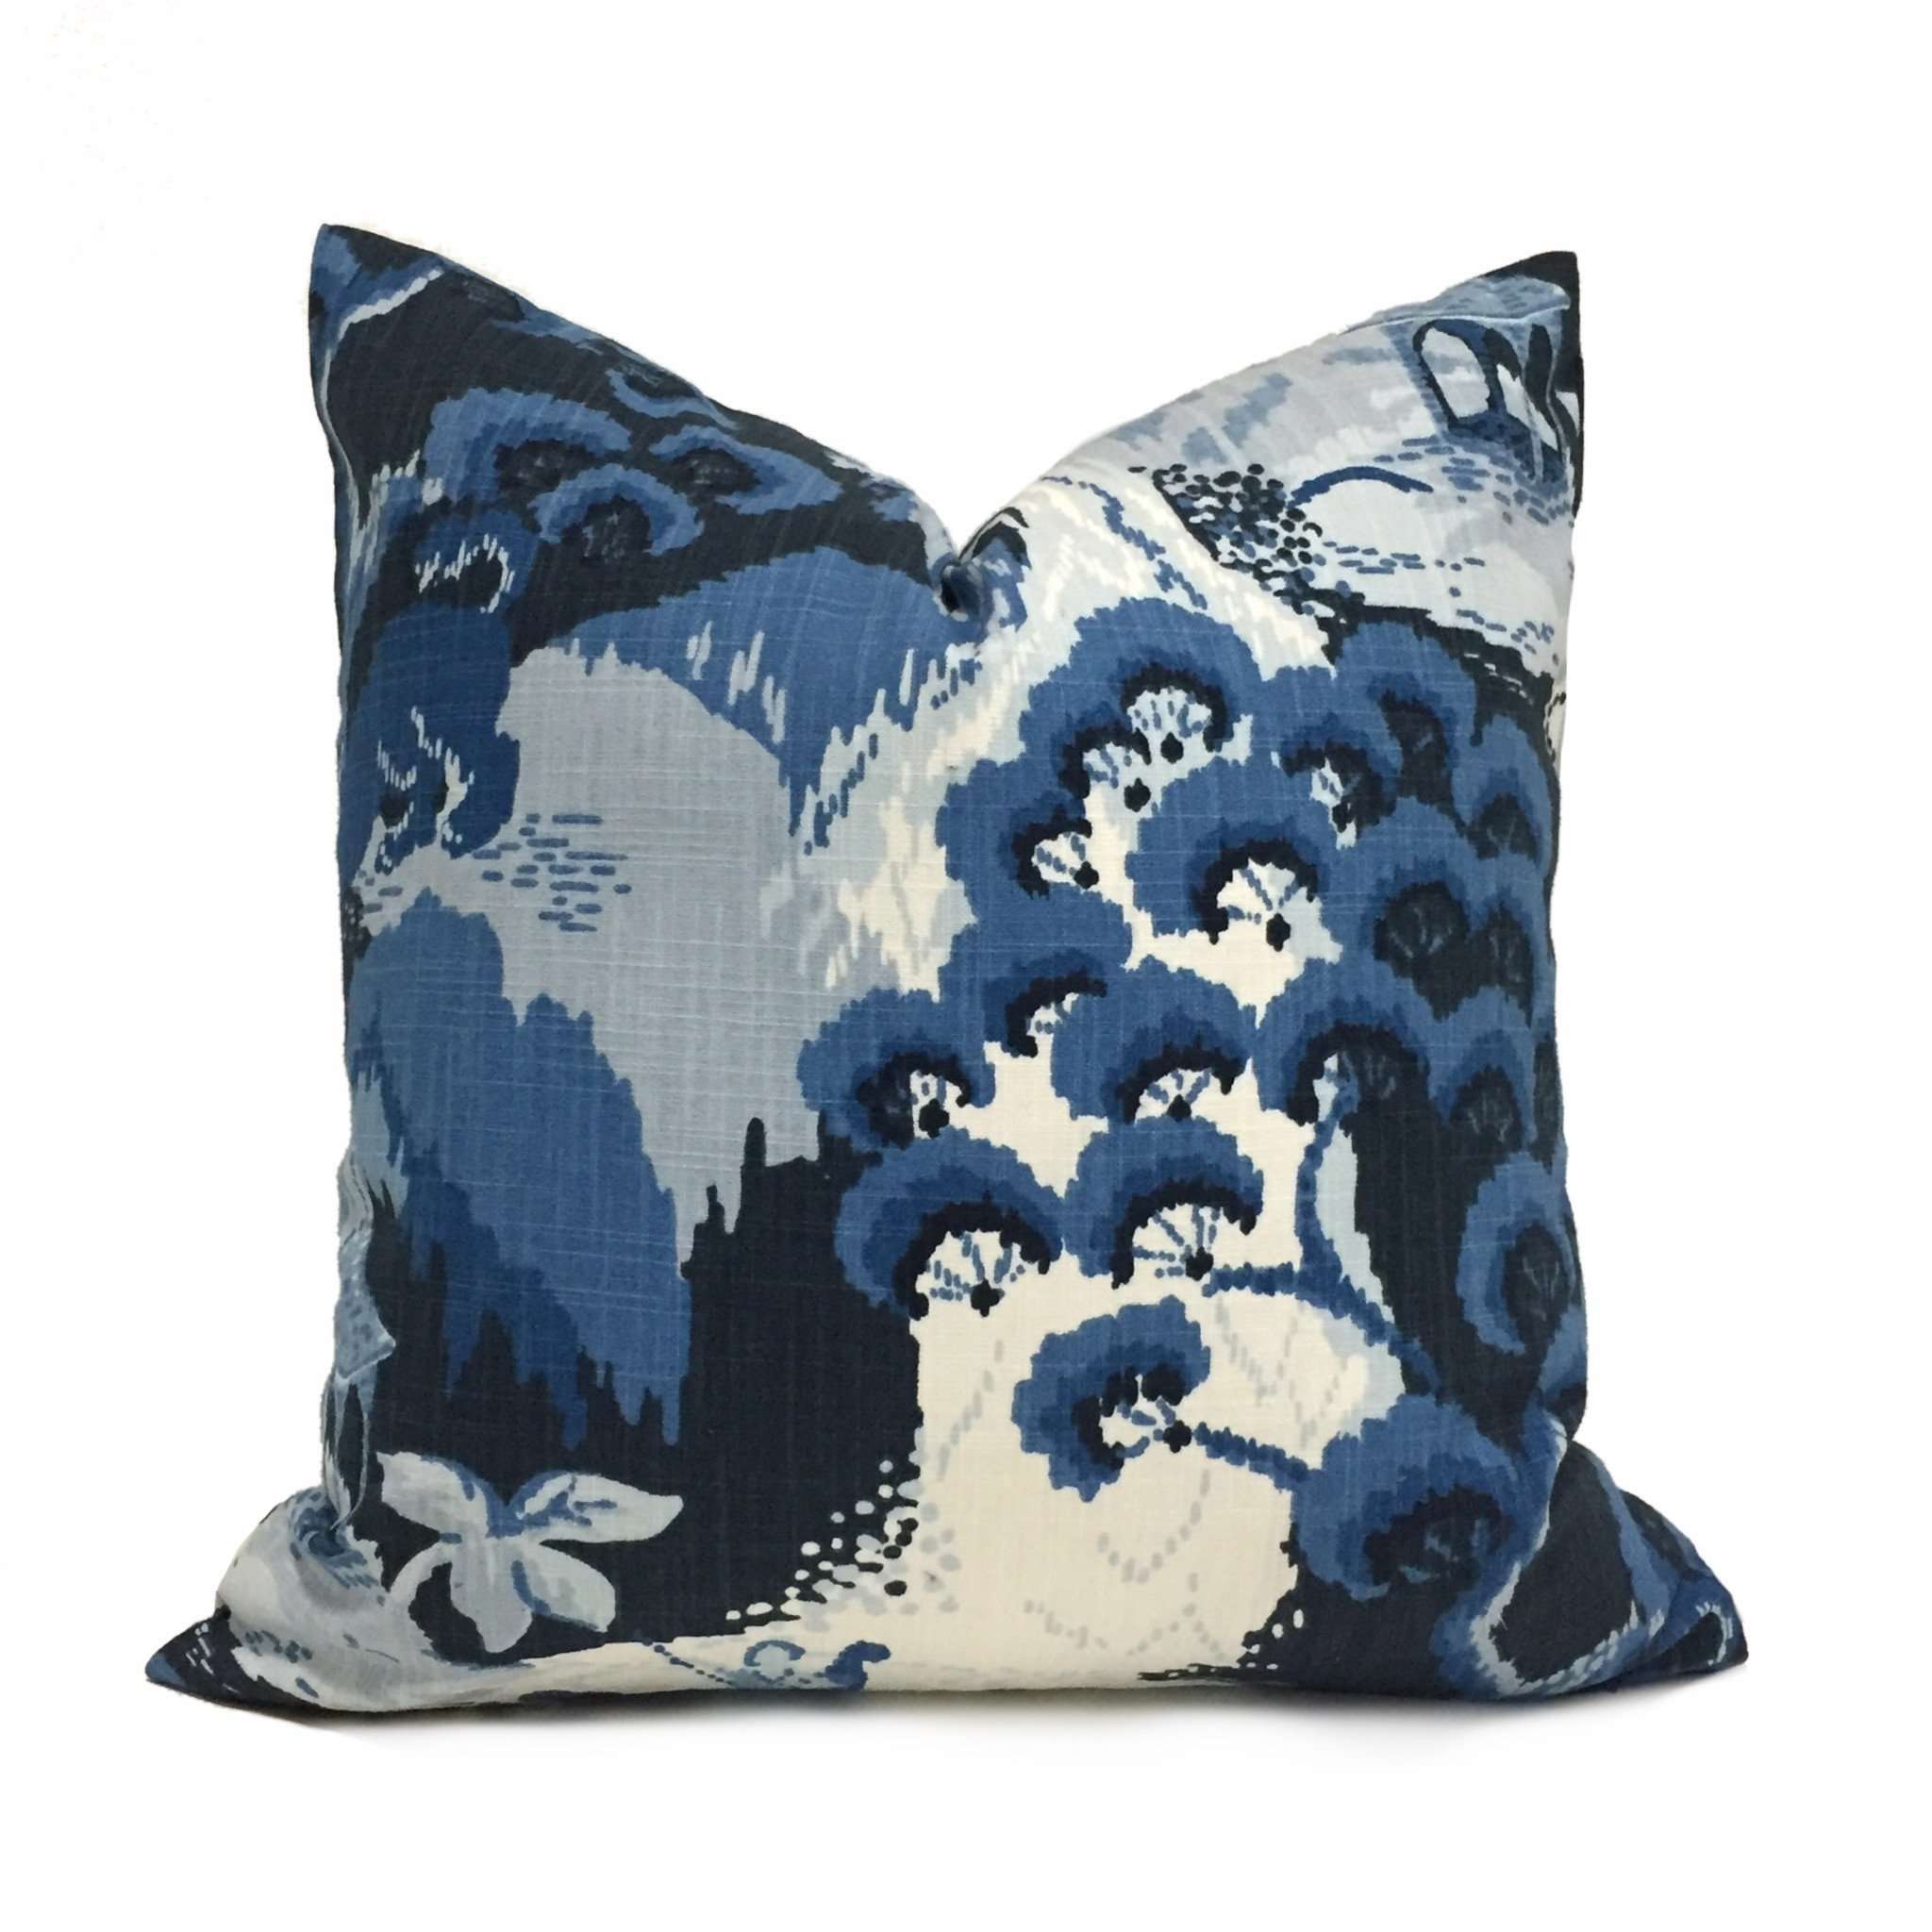 Robert Allen Madcap Cottage Road to Canton Blue Chinoiserie Asian Pillow Cover Cushion Pillow Case Euro Sham 16x16 18x18 20x20 22x22 24x24 26x26 28x28 Lumbar Pillow 12x18 12x20 12x24 14x20 16x26 by Aloriam